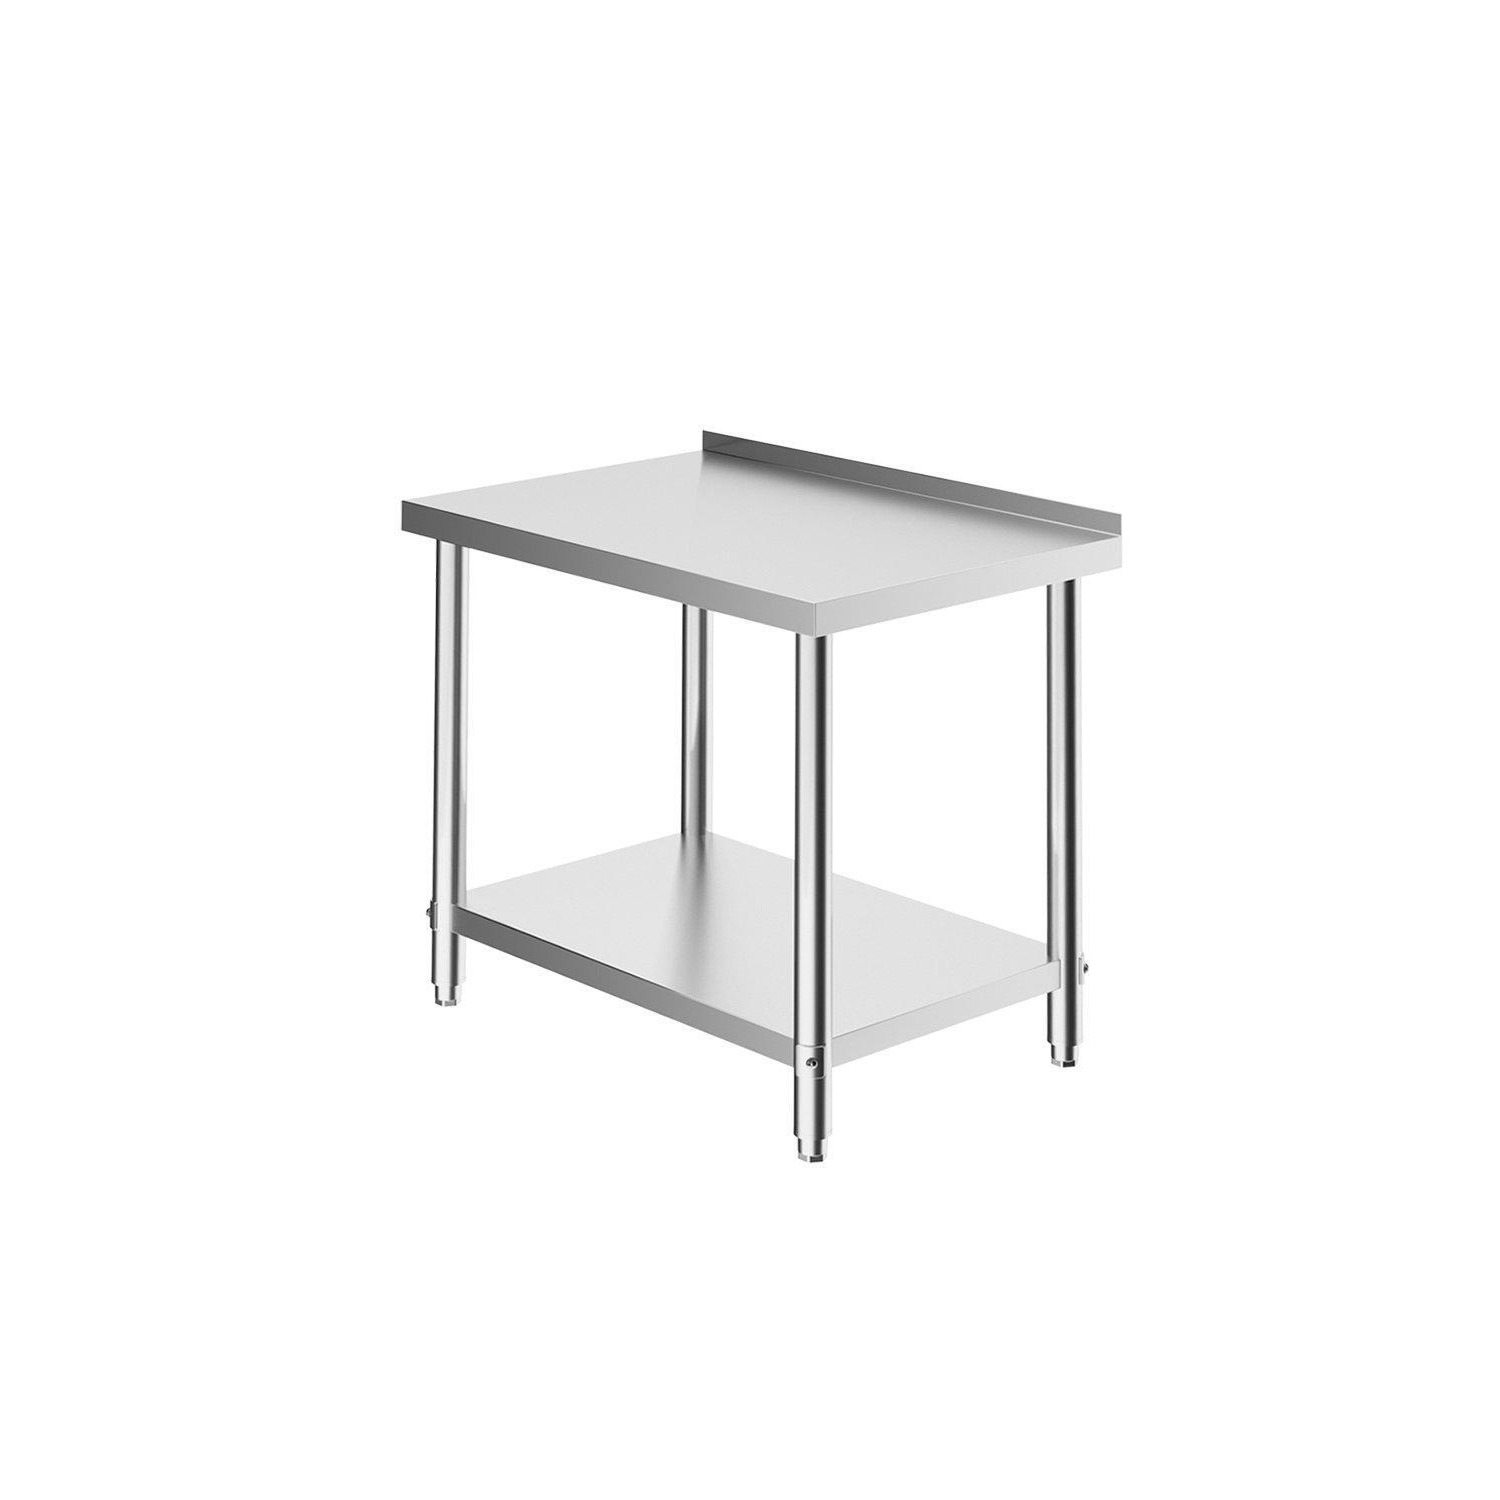 2 Tier Kitchen Prep & Work Stainless Steel Table with Backsplash - image 1